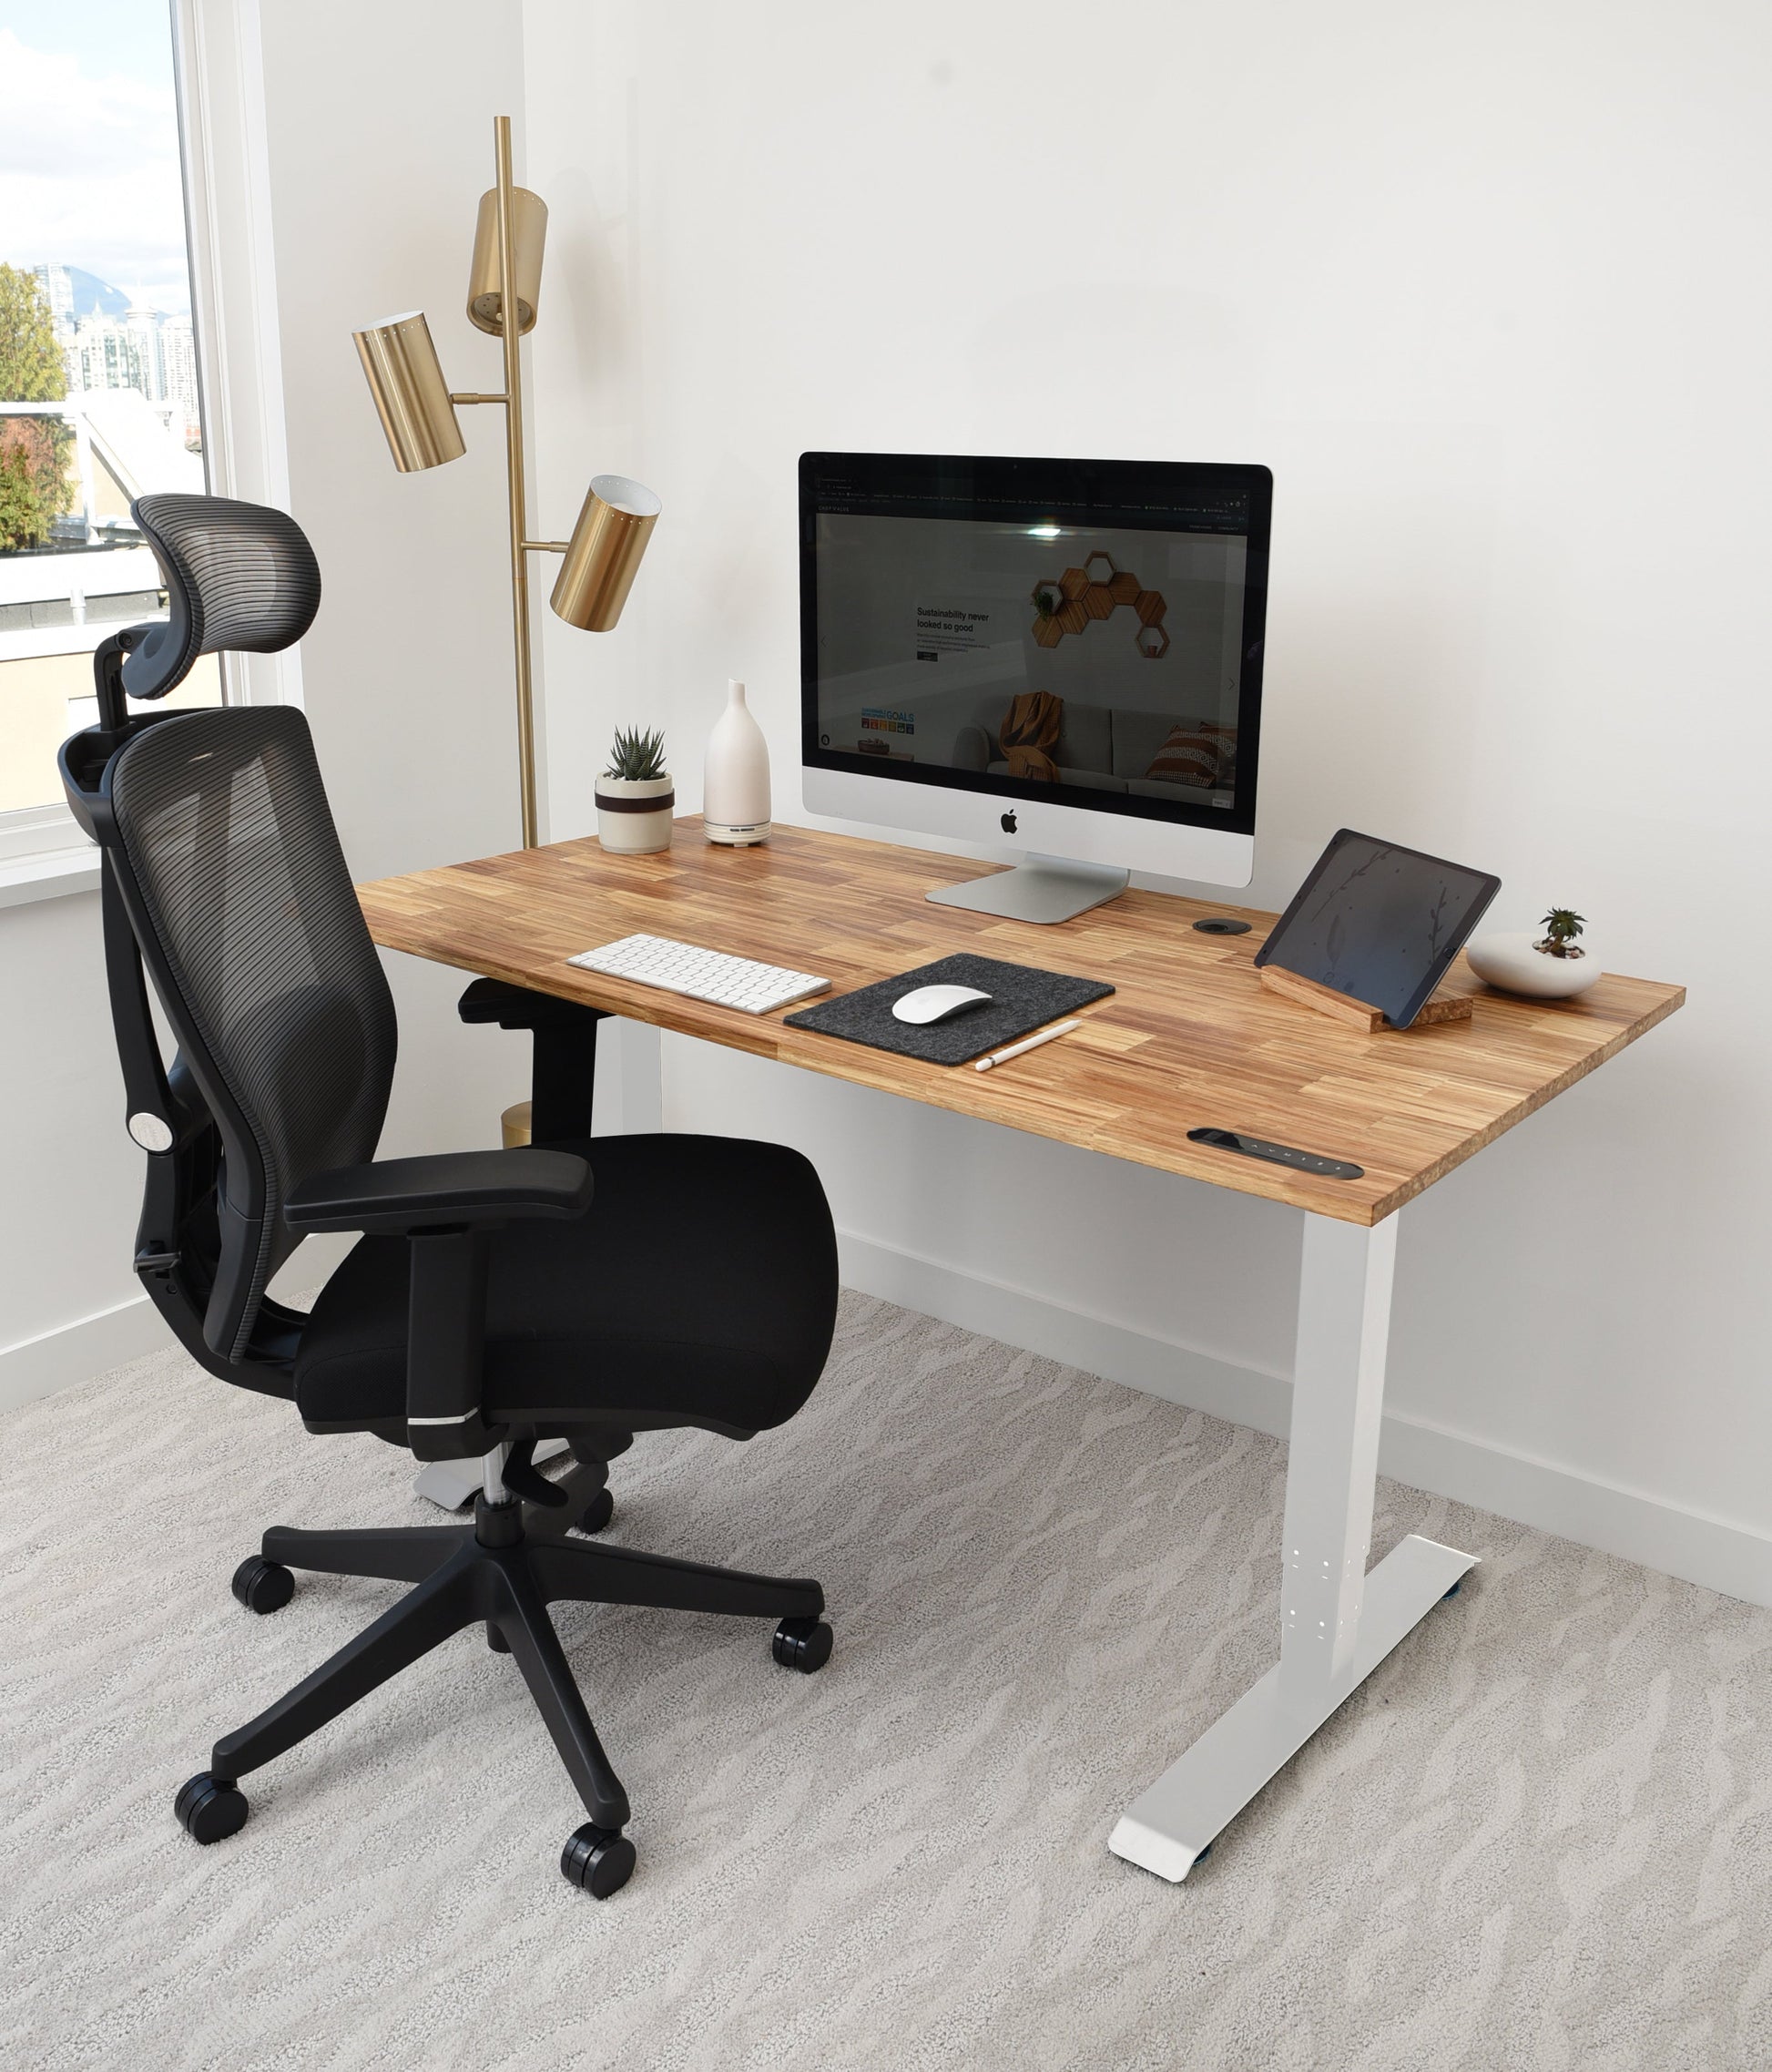 TerraDesk | Eco-Friendly Height-Adjustable Electric Standing Desk by EFFYDESK  EFFYDESK   -better made easy-eco-friendly-sustainable-gifting